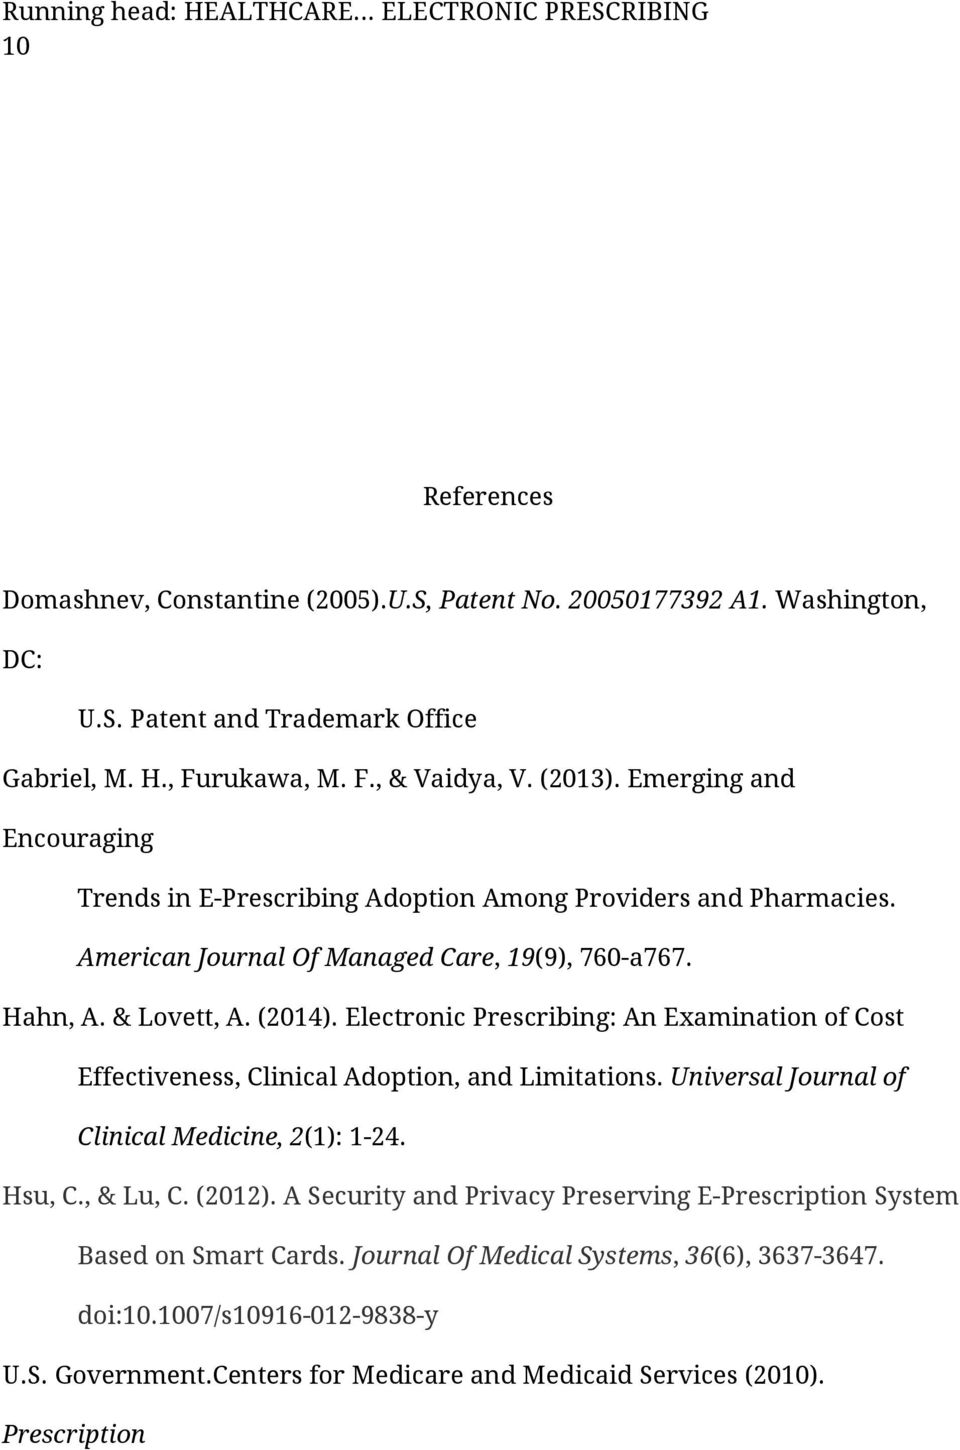 Electronic Prescribing: An Examination of Cost Effectiveness, Clinical Adoption, and Limitations. Universal Journal of Clinical Medicine, 2(1): 1-24. Hsu, C., & Lu, C. (2012).